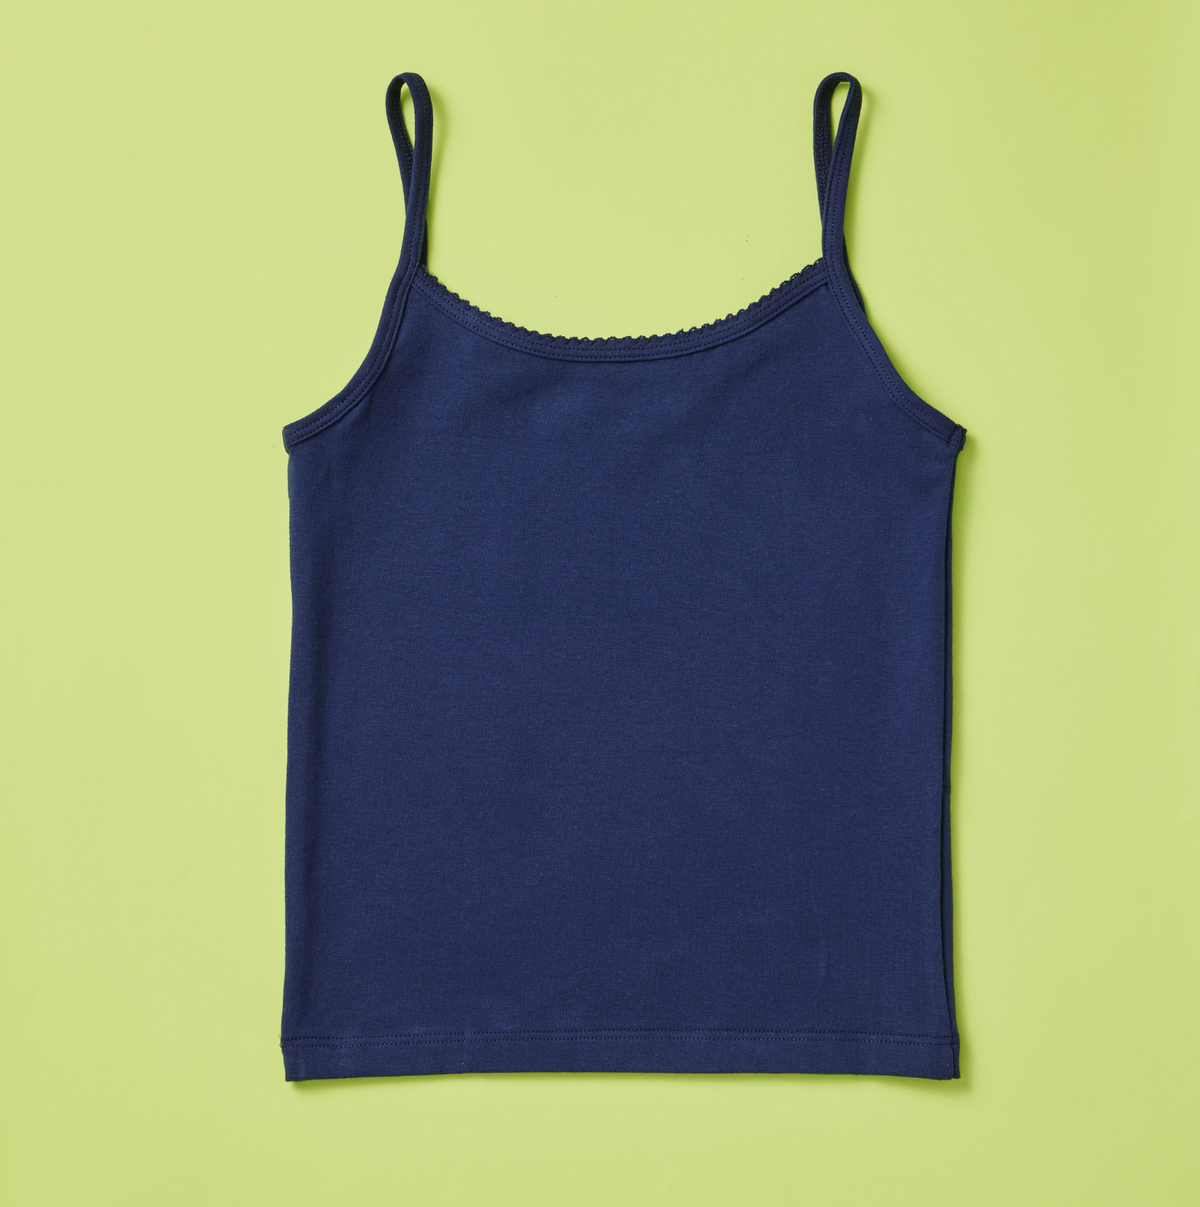 Jane Classic Everyday Cotton Camisole for Girls